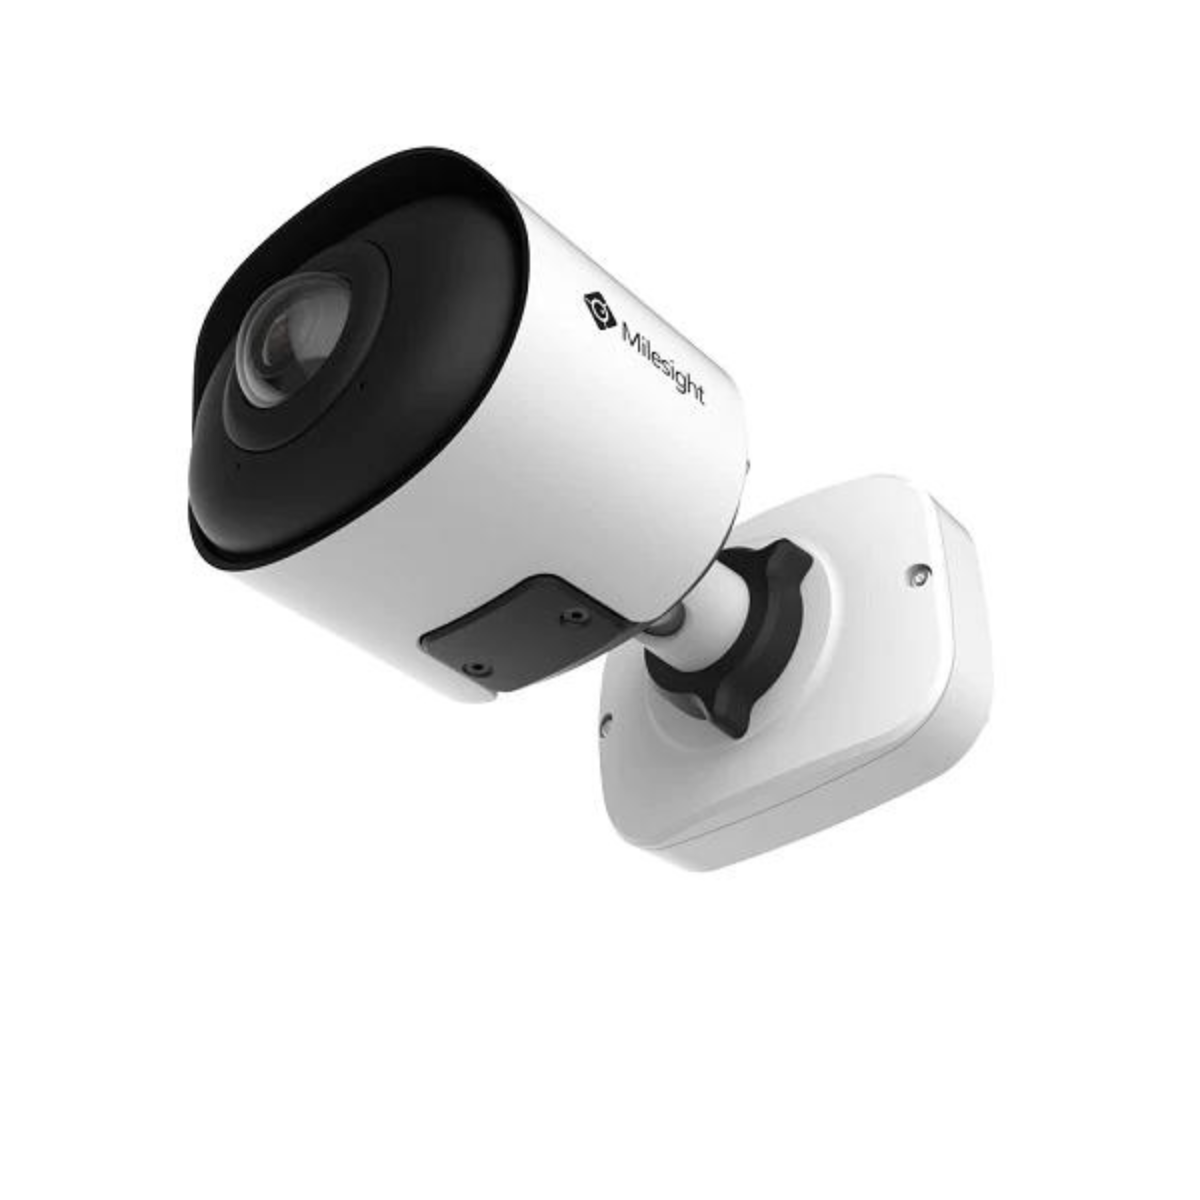 High-Resolution Mini Bullet Camera with Motorized Lens for Smooth Video Capture